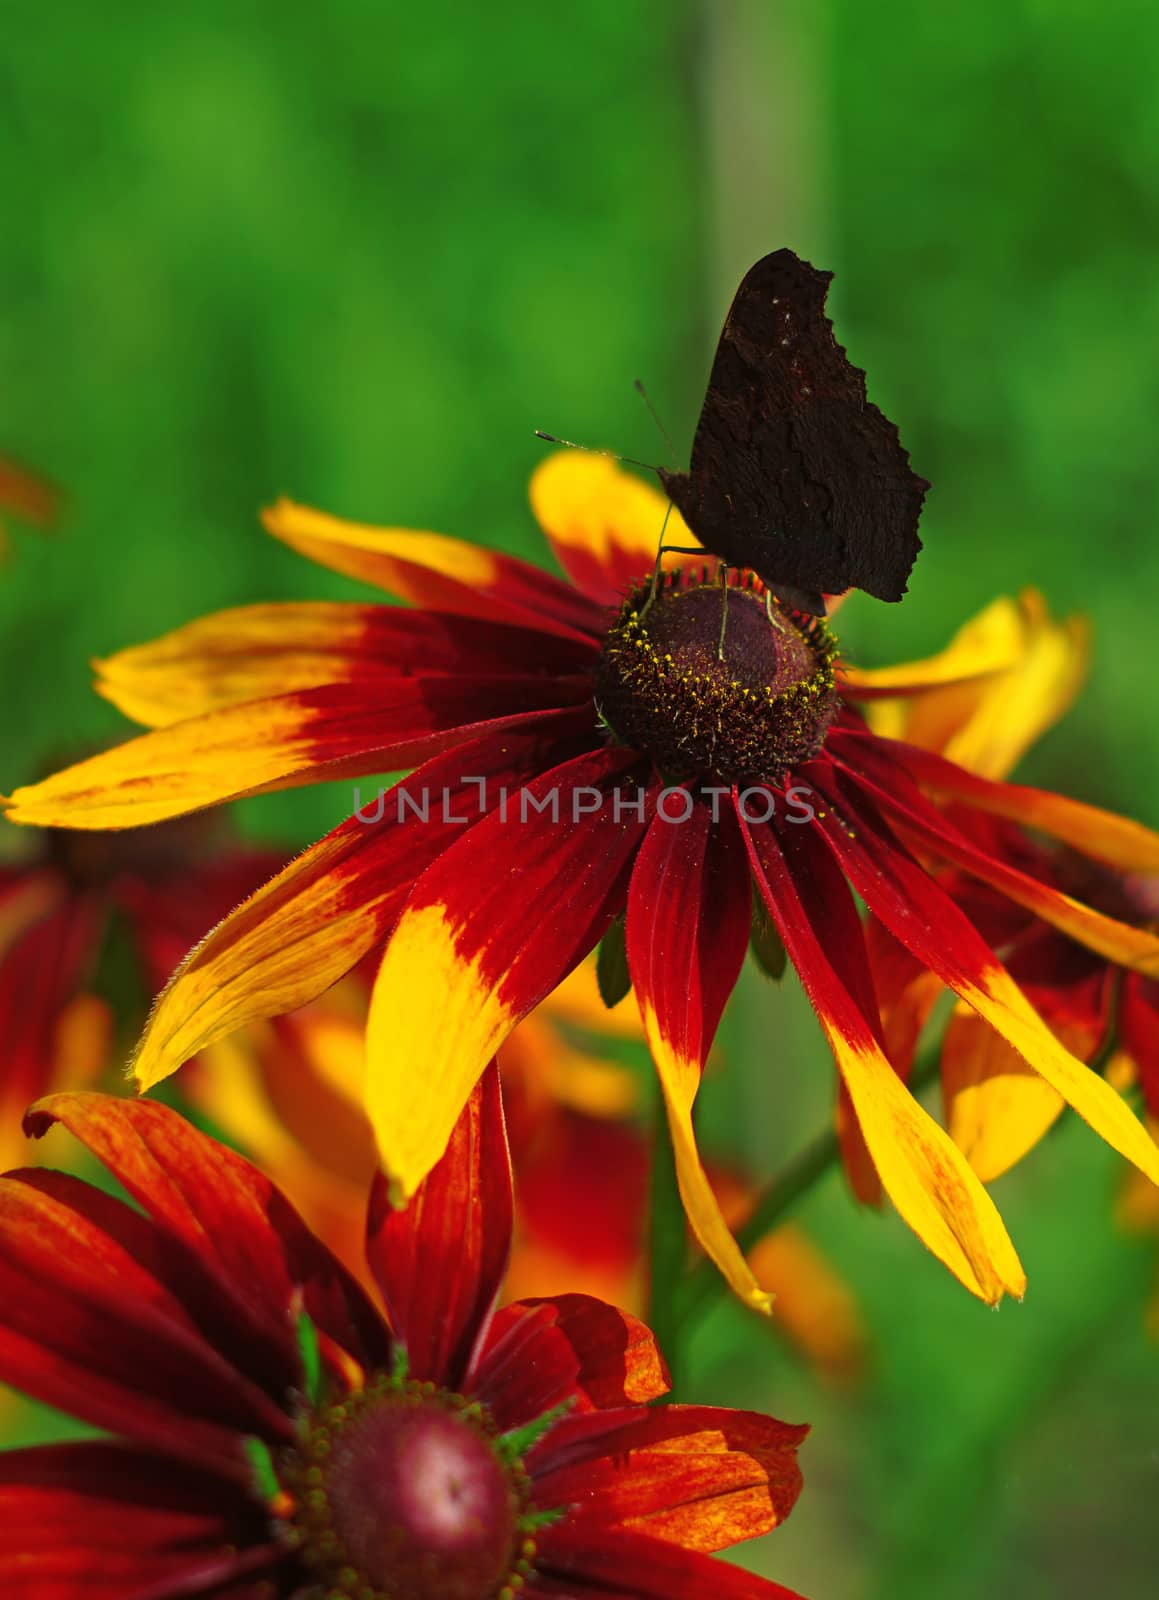 Butterfly on a yellow flower rudbeckia closeup by Chiffanna